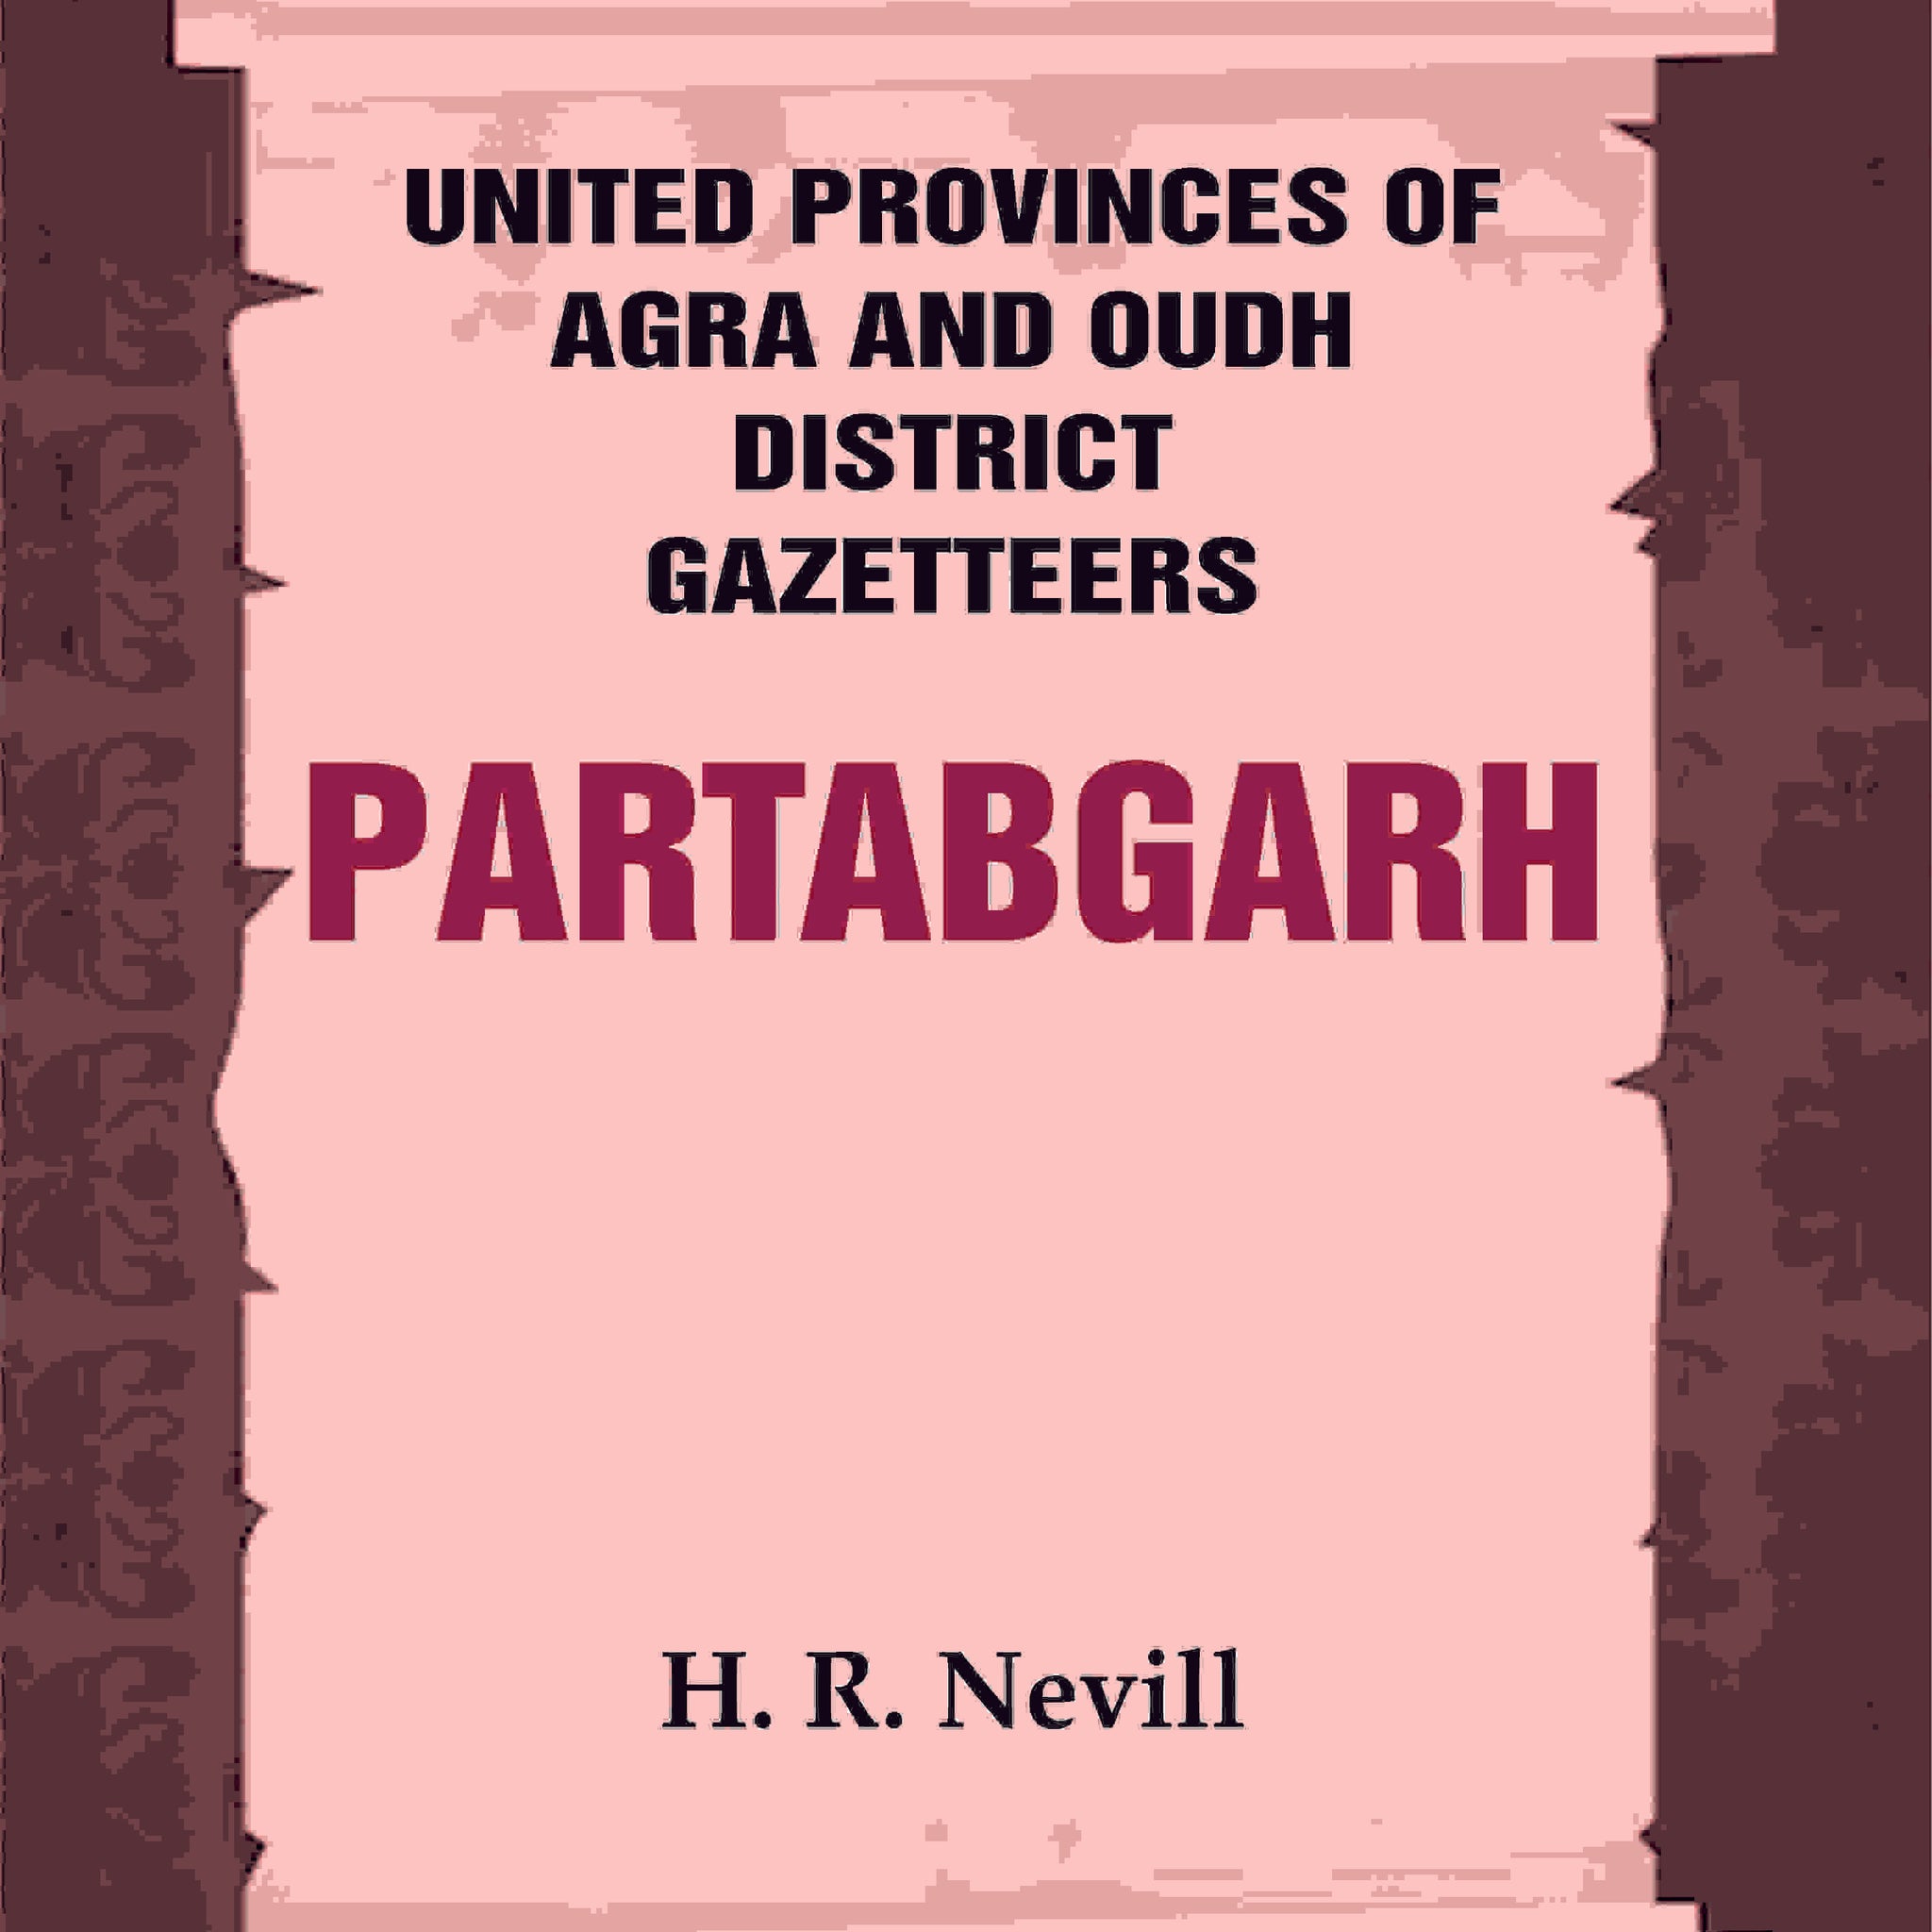 United Provinces of Agra and Oudh District Gazetteers: Partabgarh